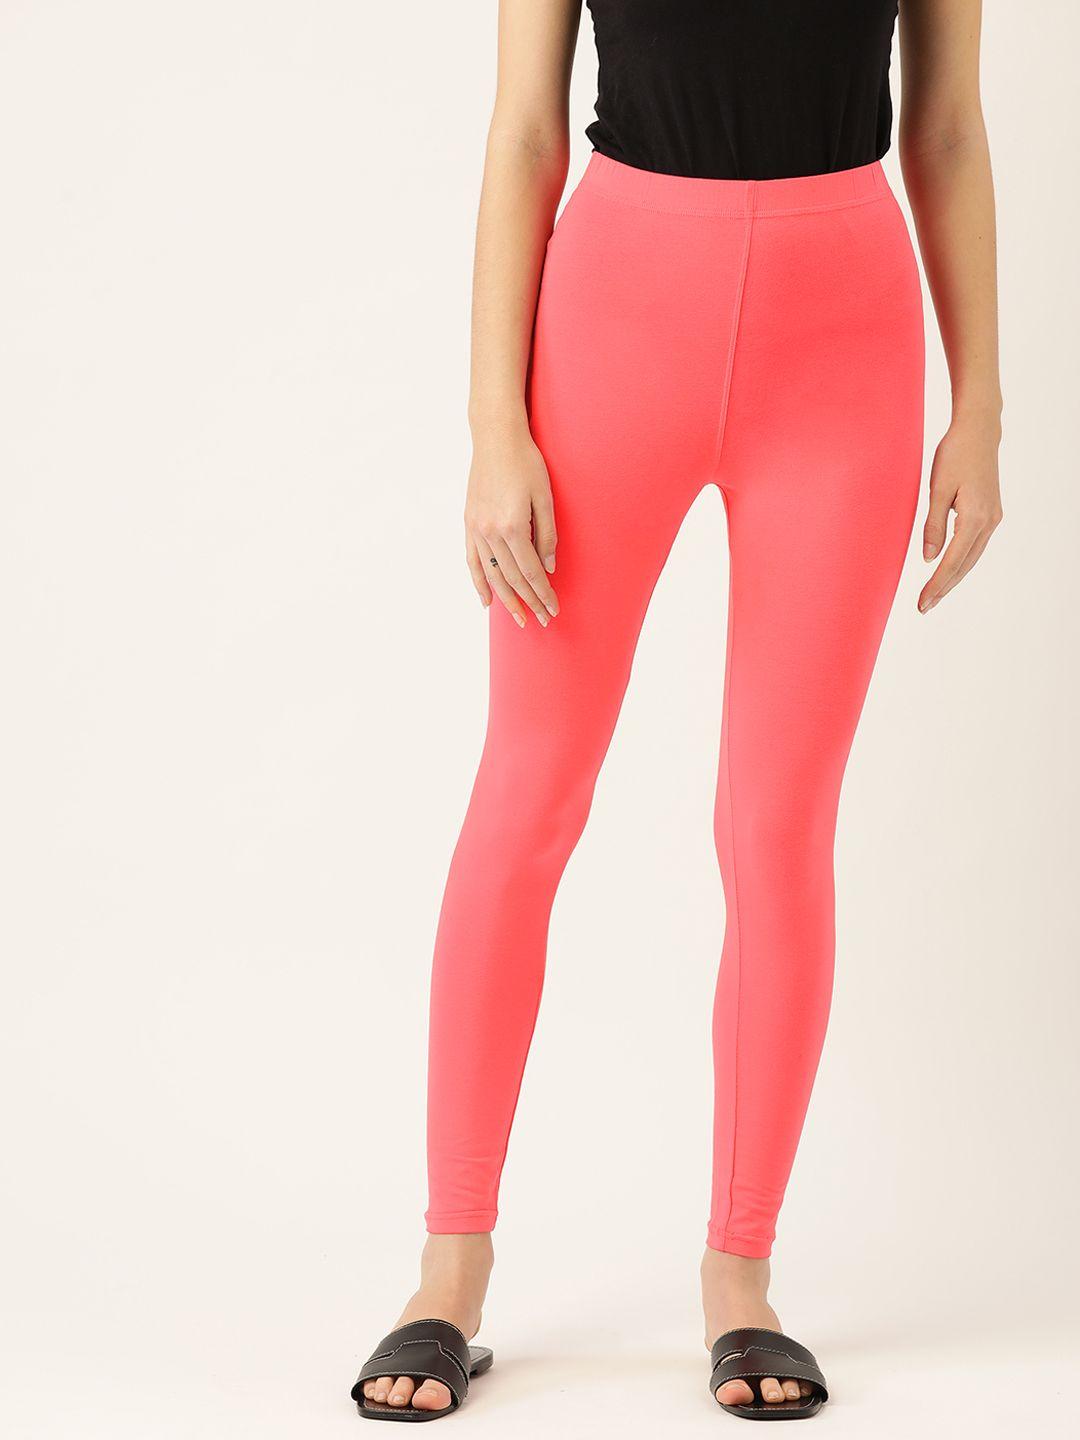 leading-lady-women-coral-pink-solid-ankle-length-leggings